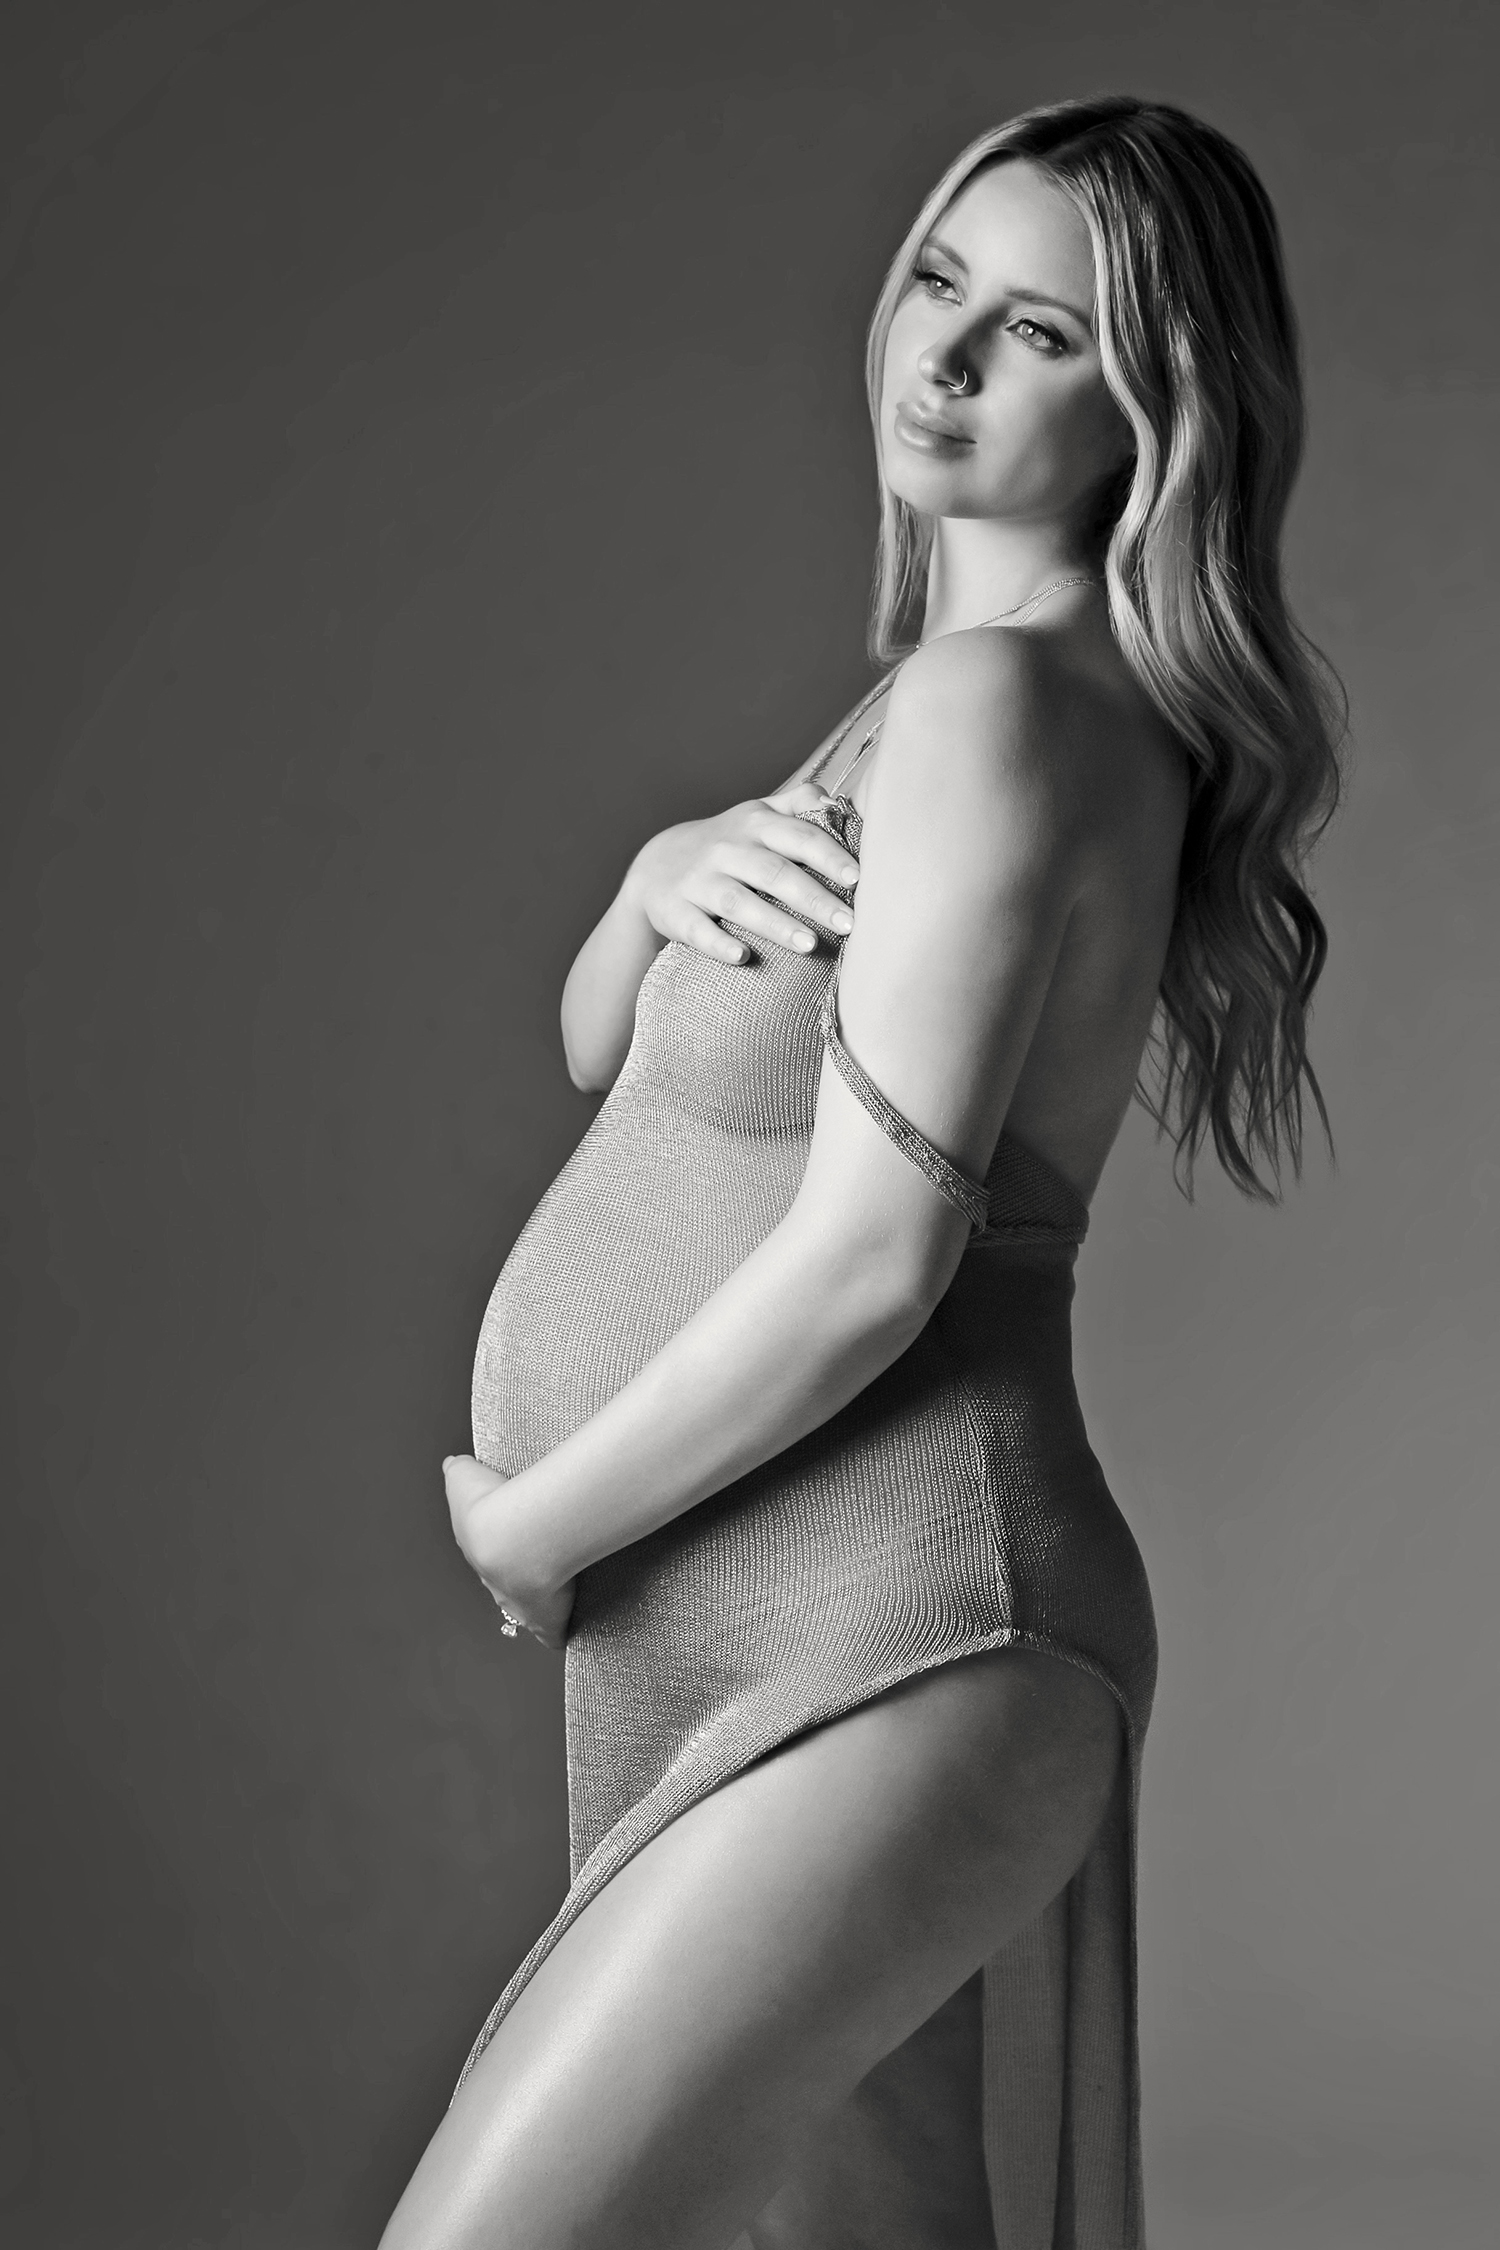 Delicate fabrics create a serene atmosphere as a pregnant womanposes serenely during her luxury maternity photoshoot.